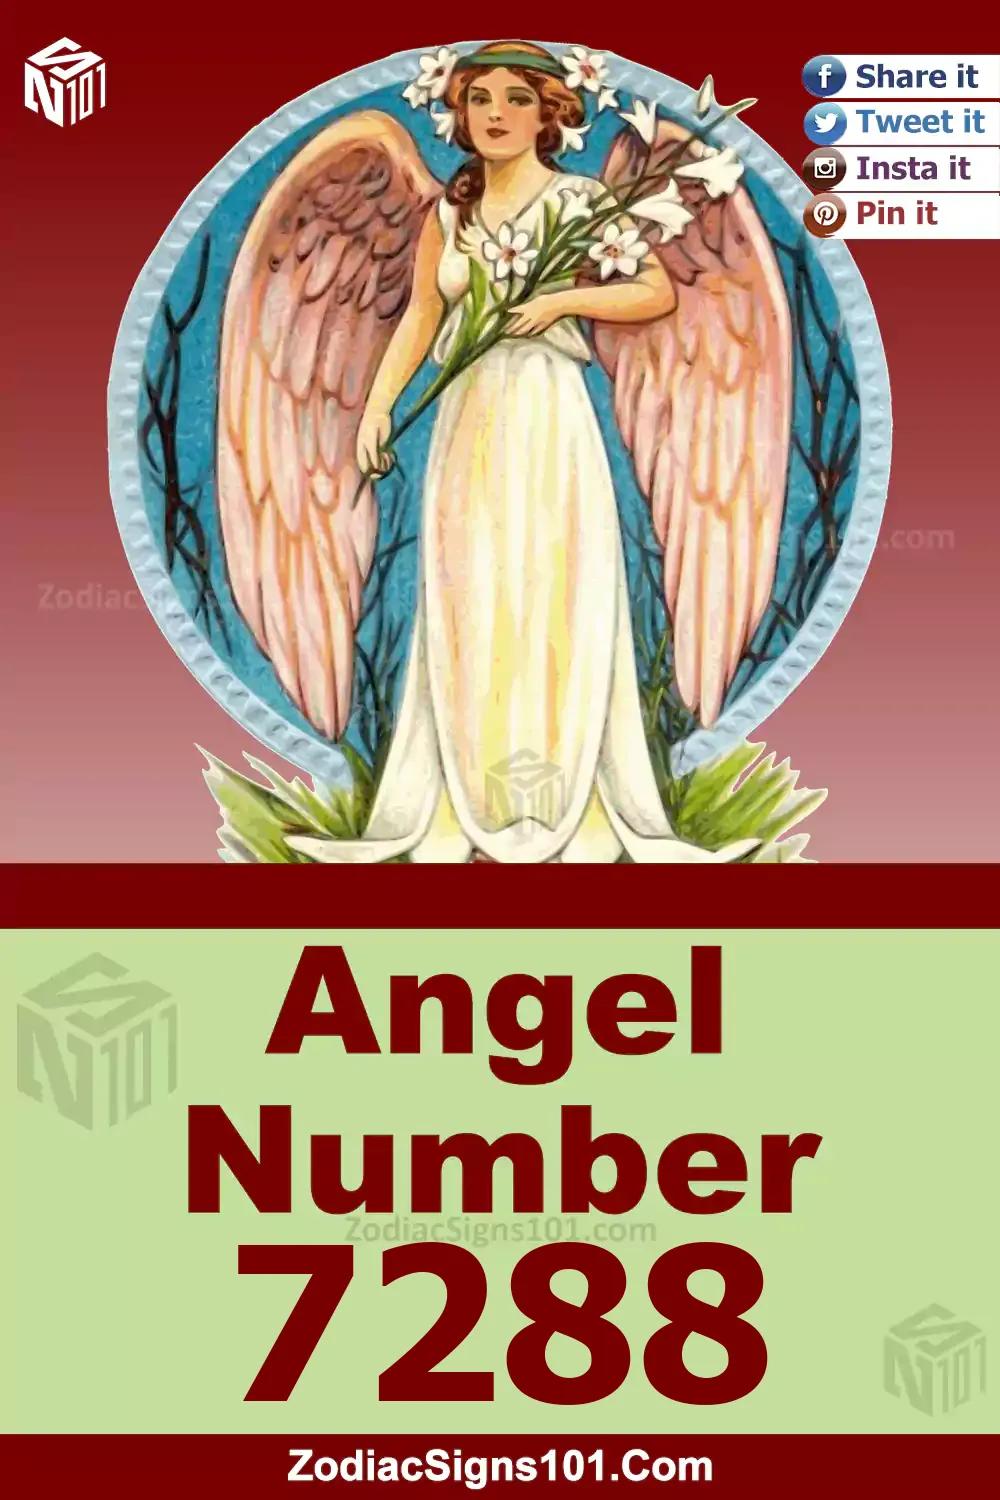 7288 Angel Number Meaning